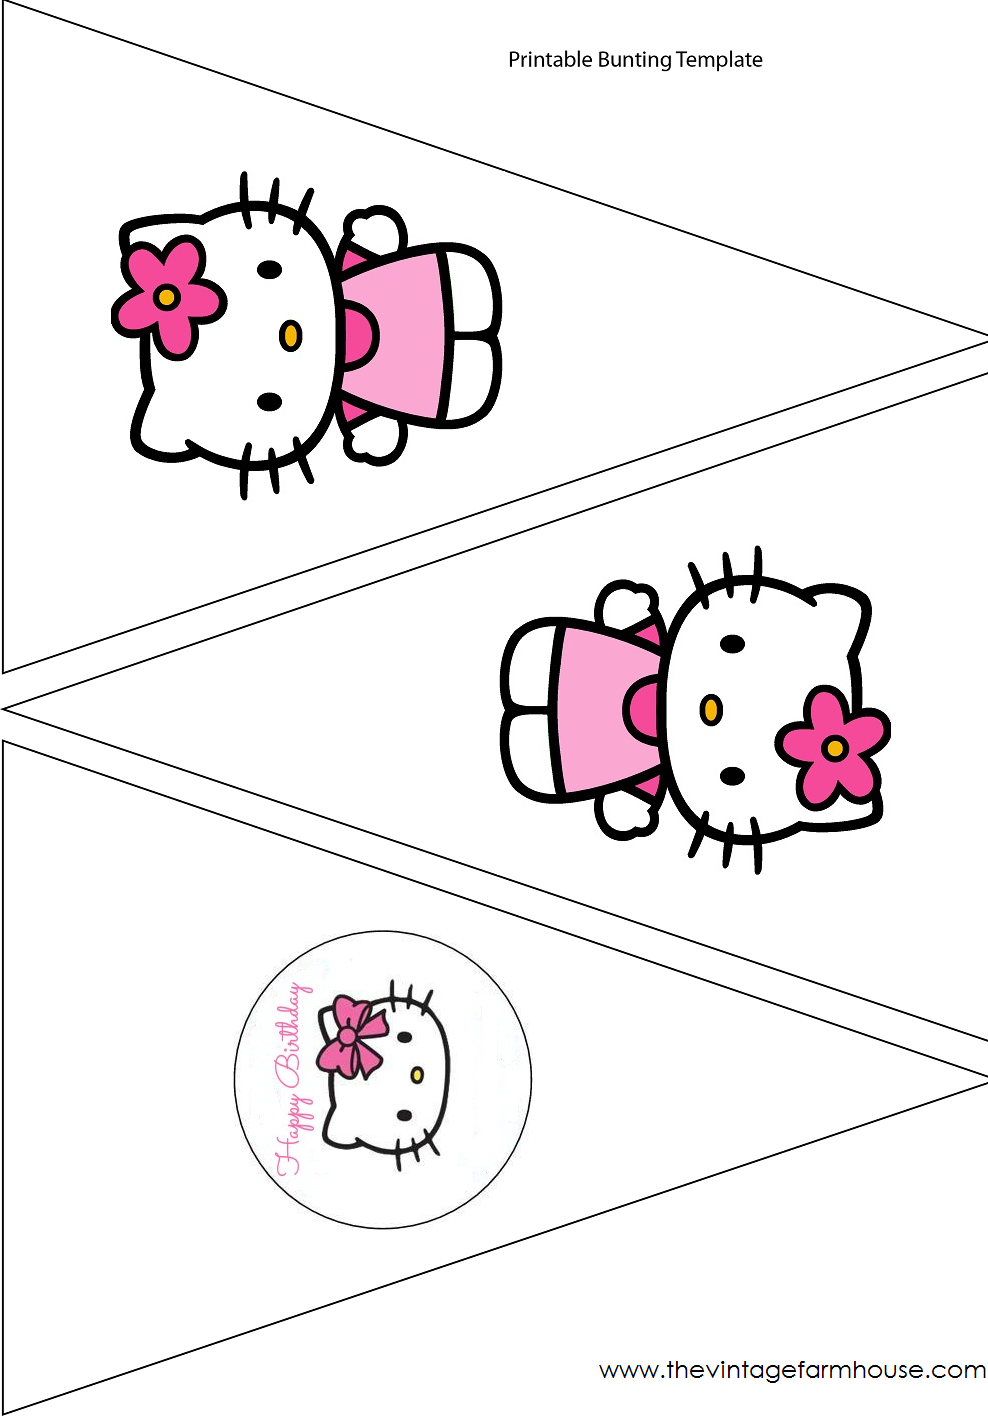 Simple Cute Hello Kitty Free Printable Kit. - Oh My Fiesta Throughout Hello Kitty Banner Template